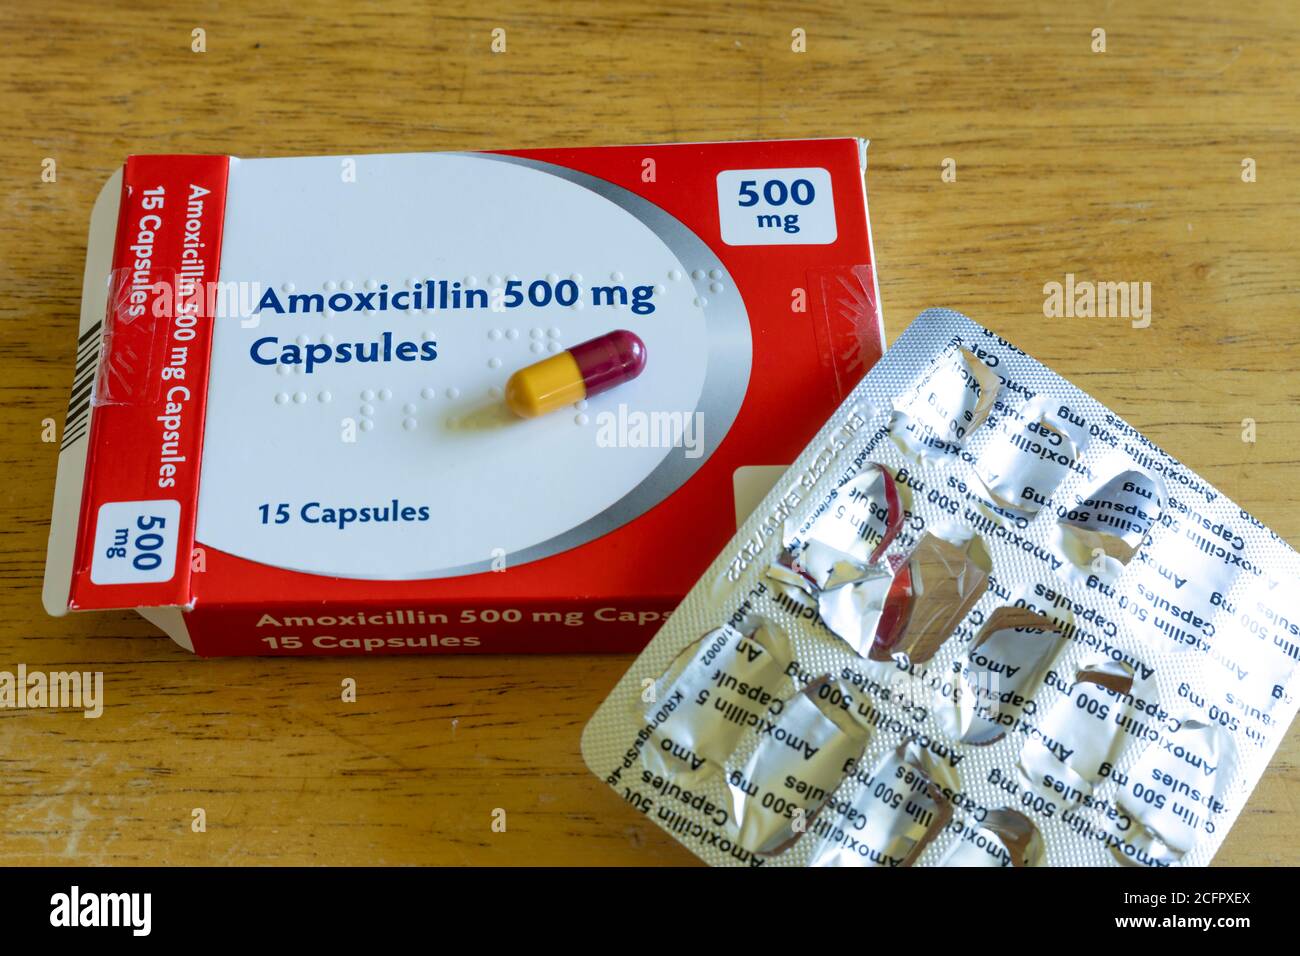 Opened packet of Amoxicillin capsules, a common antibiotic medication used for treating infections Stock Photo